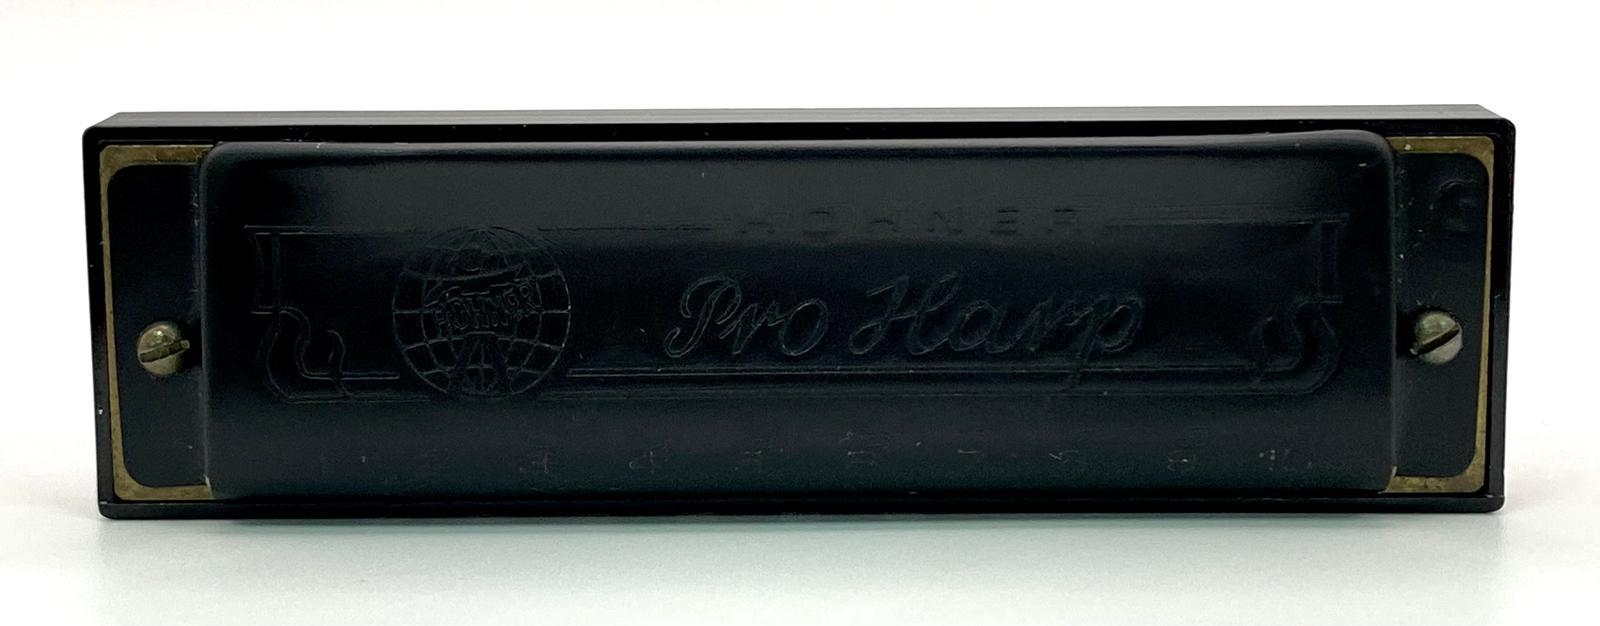 Four Vintage Harmonicas - Two German Pro Harps and Two Miniatures! - Image 4 of 8